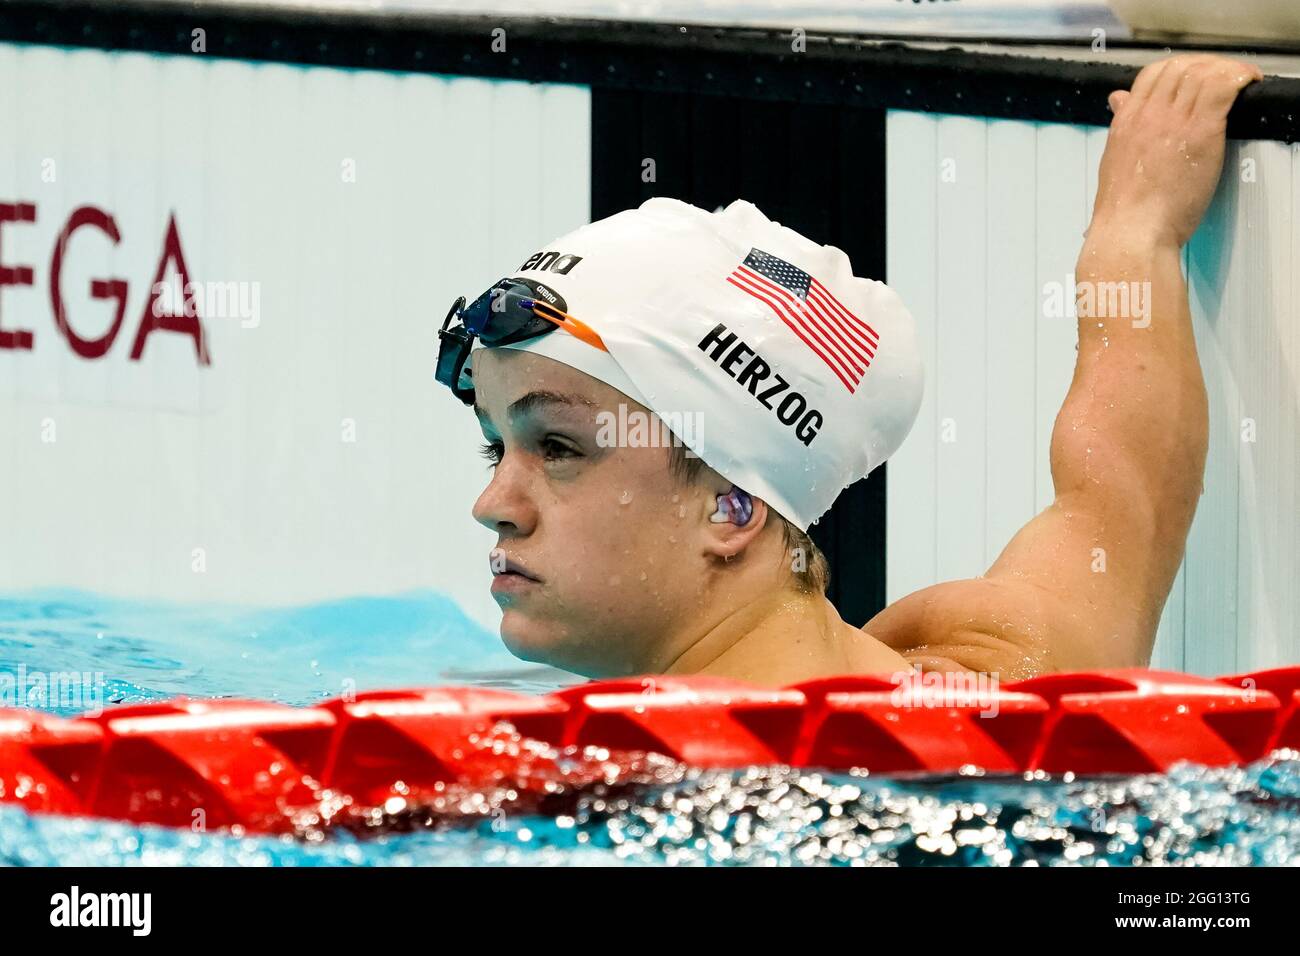 TOKYO, JAPAN - AUGUST 28: Sophia Herzog of the United States after competing in the Women's 100m Breaststroke SB6 Heats during the Tokyo 2020 Paralympic Games at Tokyo Aquatics Centre on August 28, 2021 in Tokyo, Japan (Photo by Ilse Schaffers/Orange Pictures) NOCNSF Stock Photo